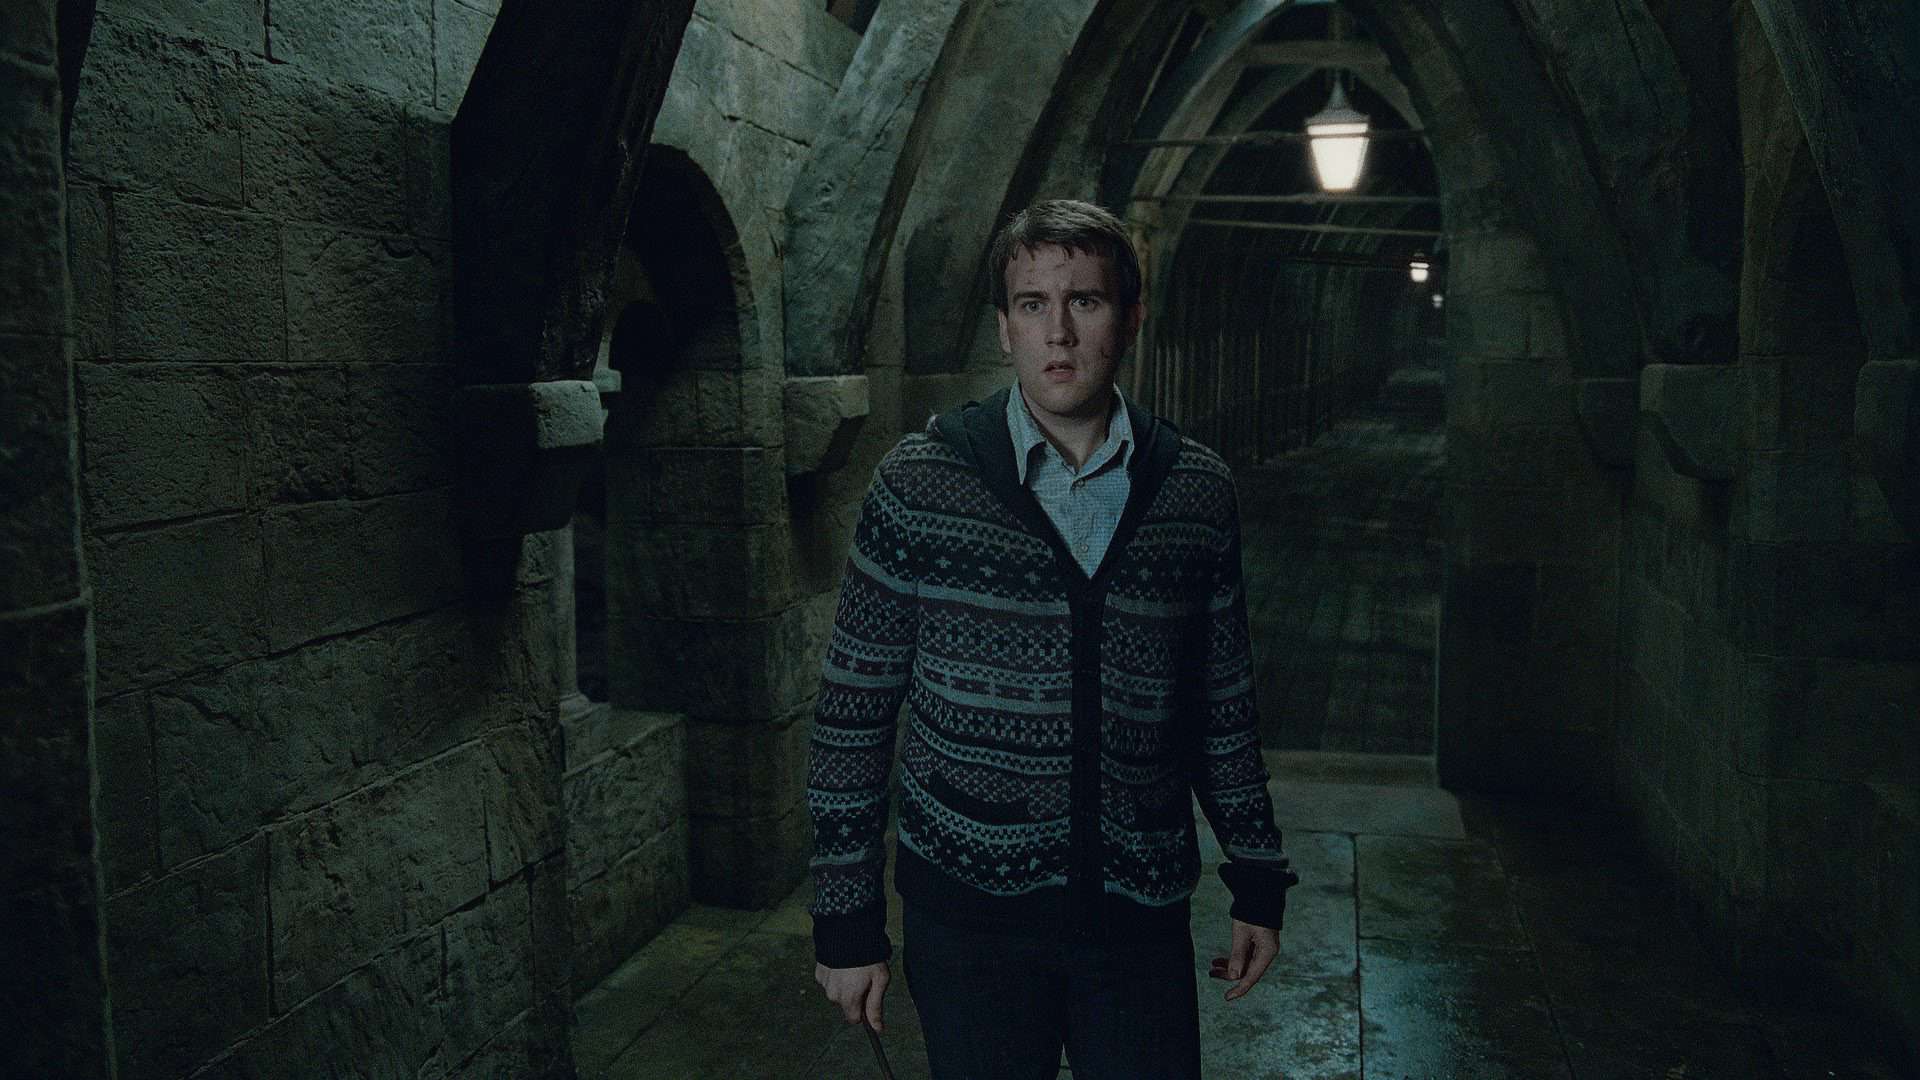 Matthew Lewis as Neville Longbottom in Harry Potter and the Deathly Hallows: Part 2